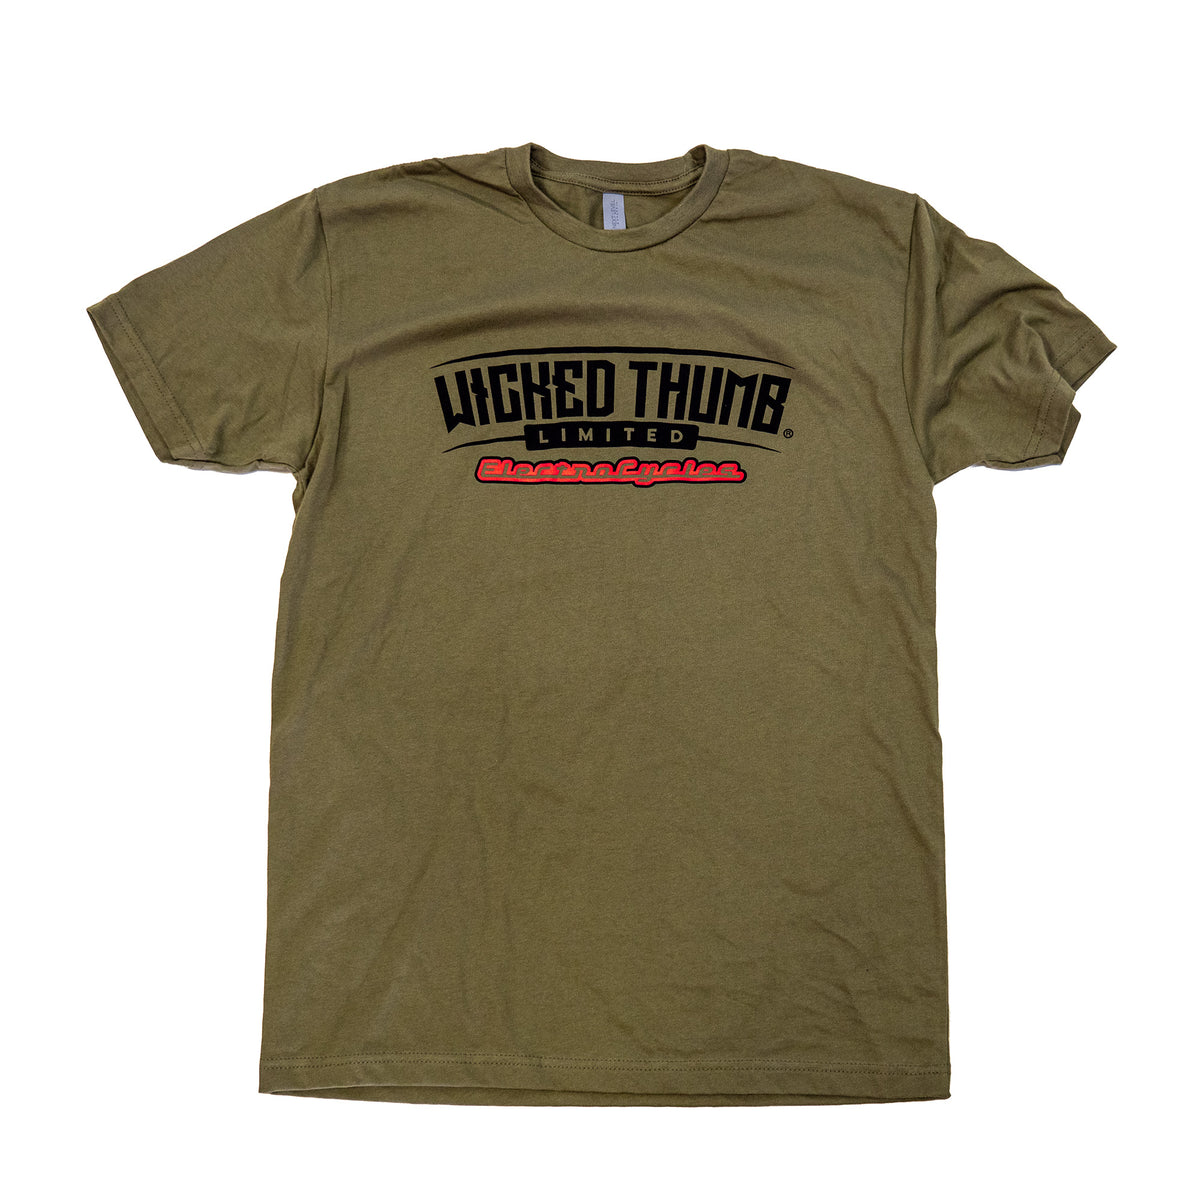 Wicked Thumb Army Blade Tee – Wicked Thumb Limited Co.